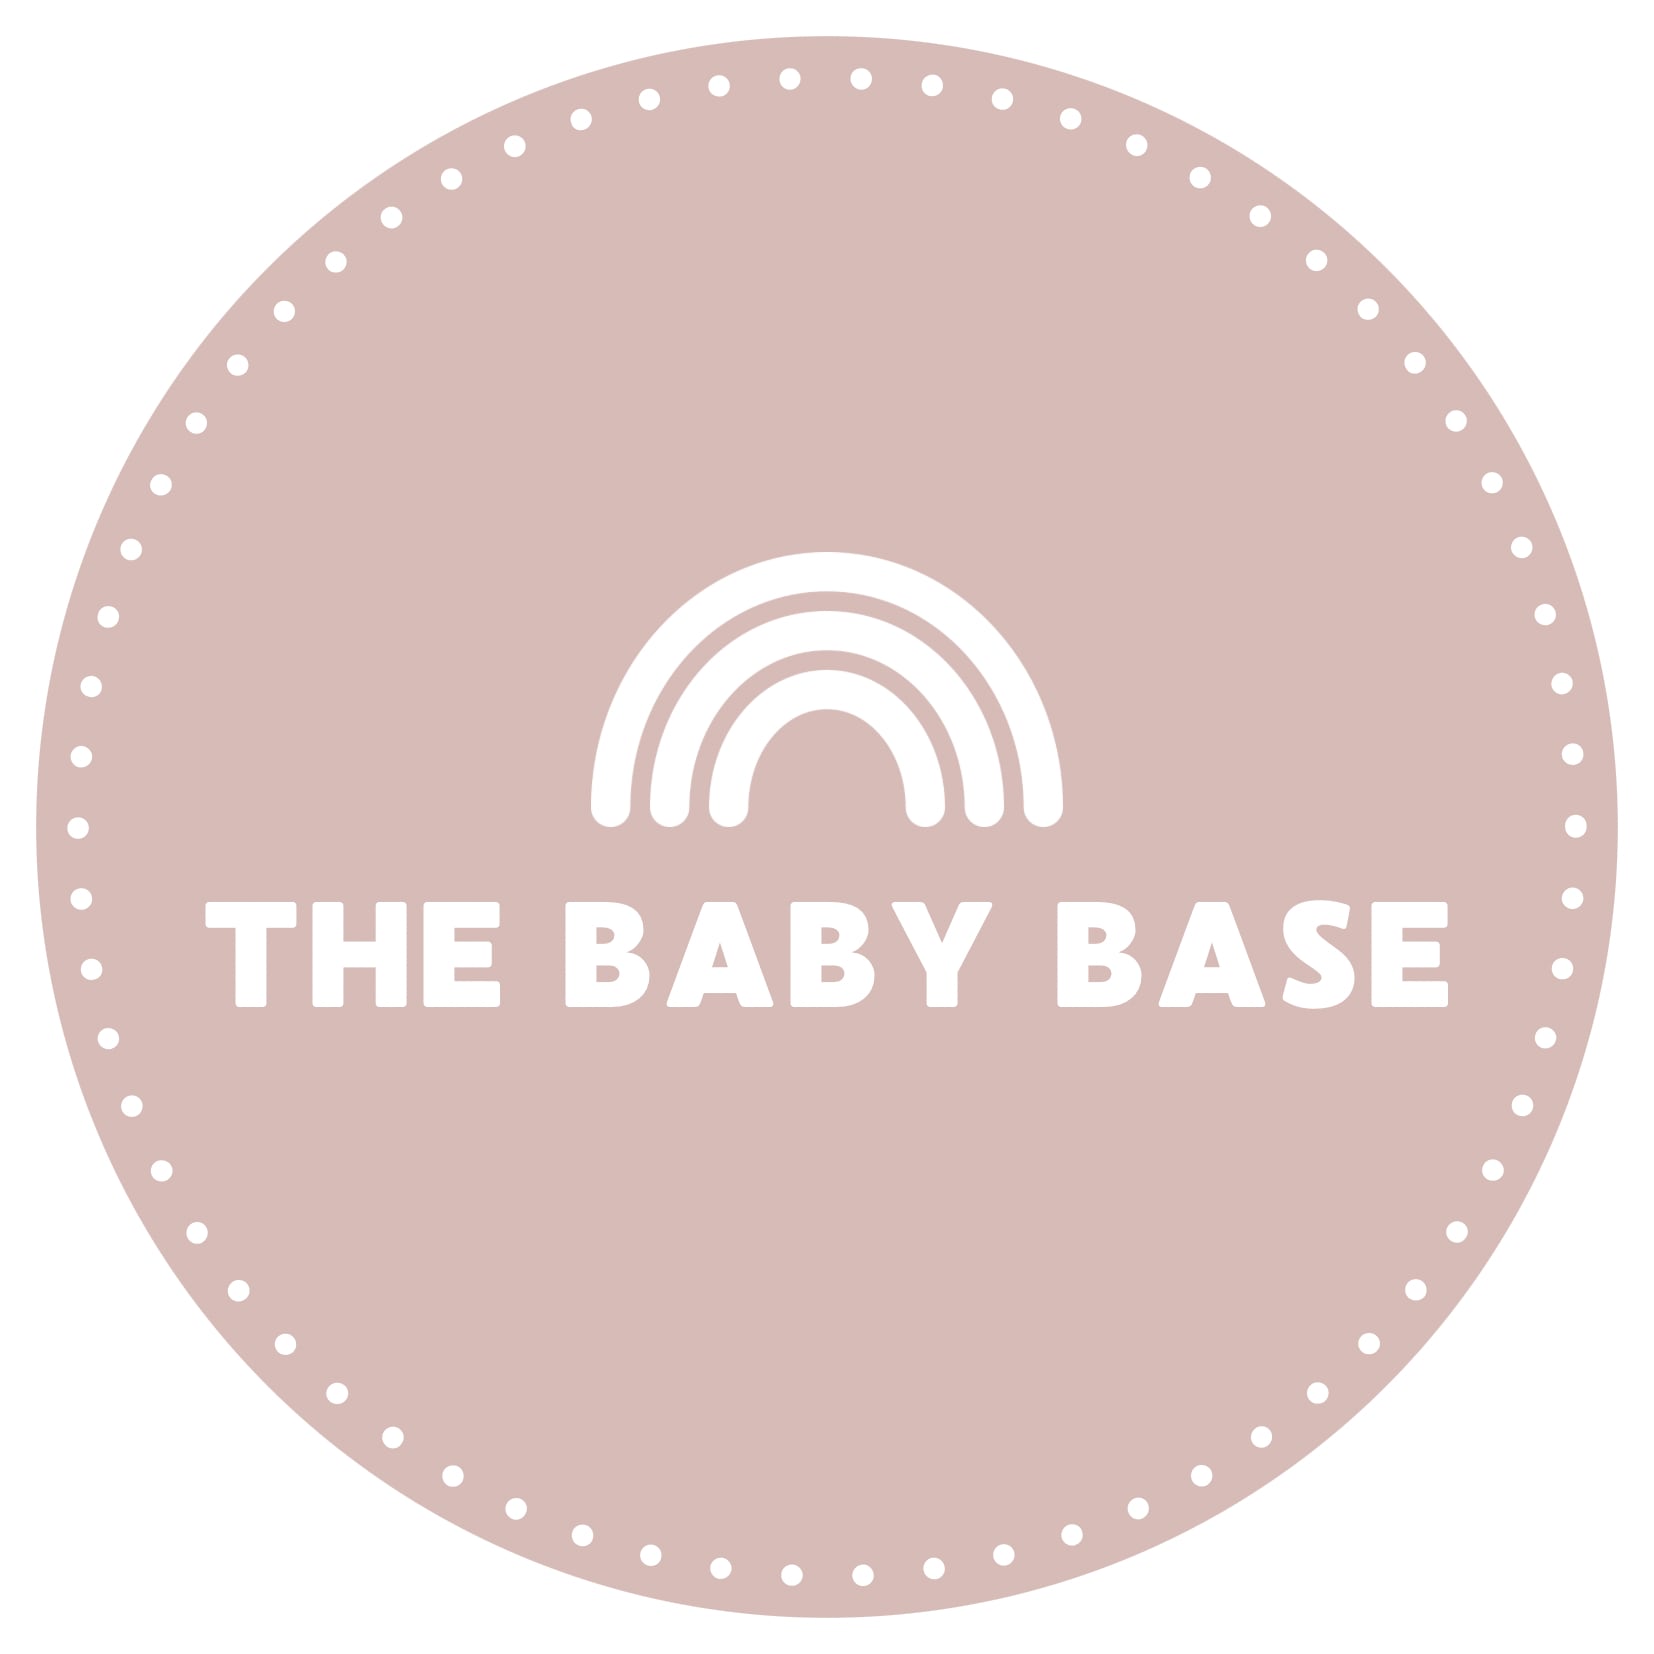 THE BABY BASE